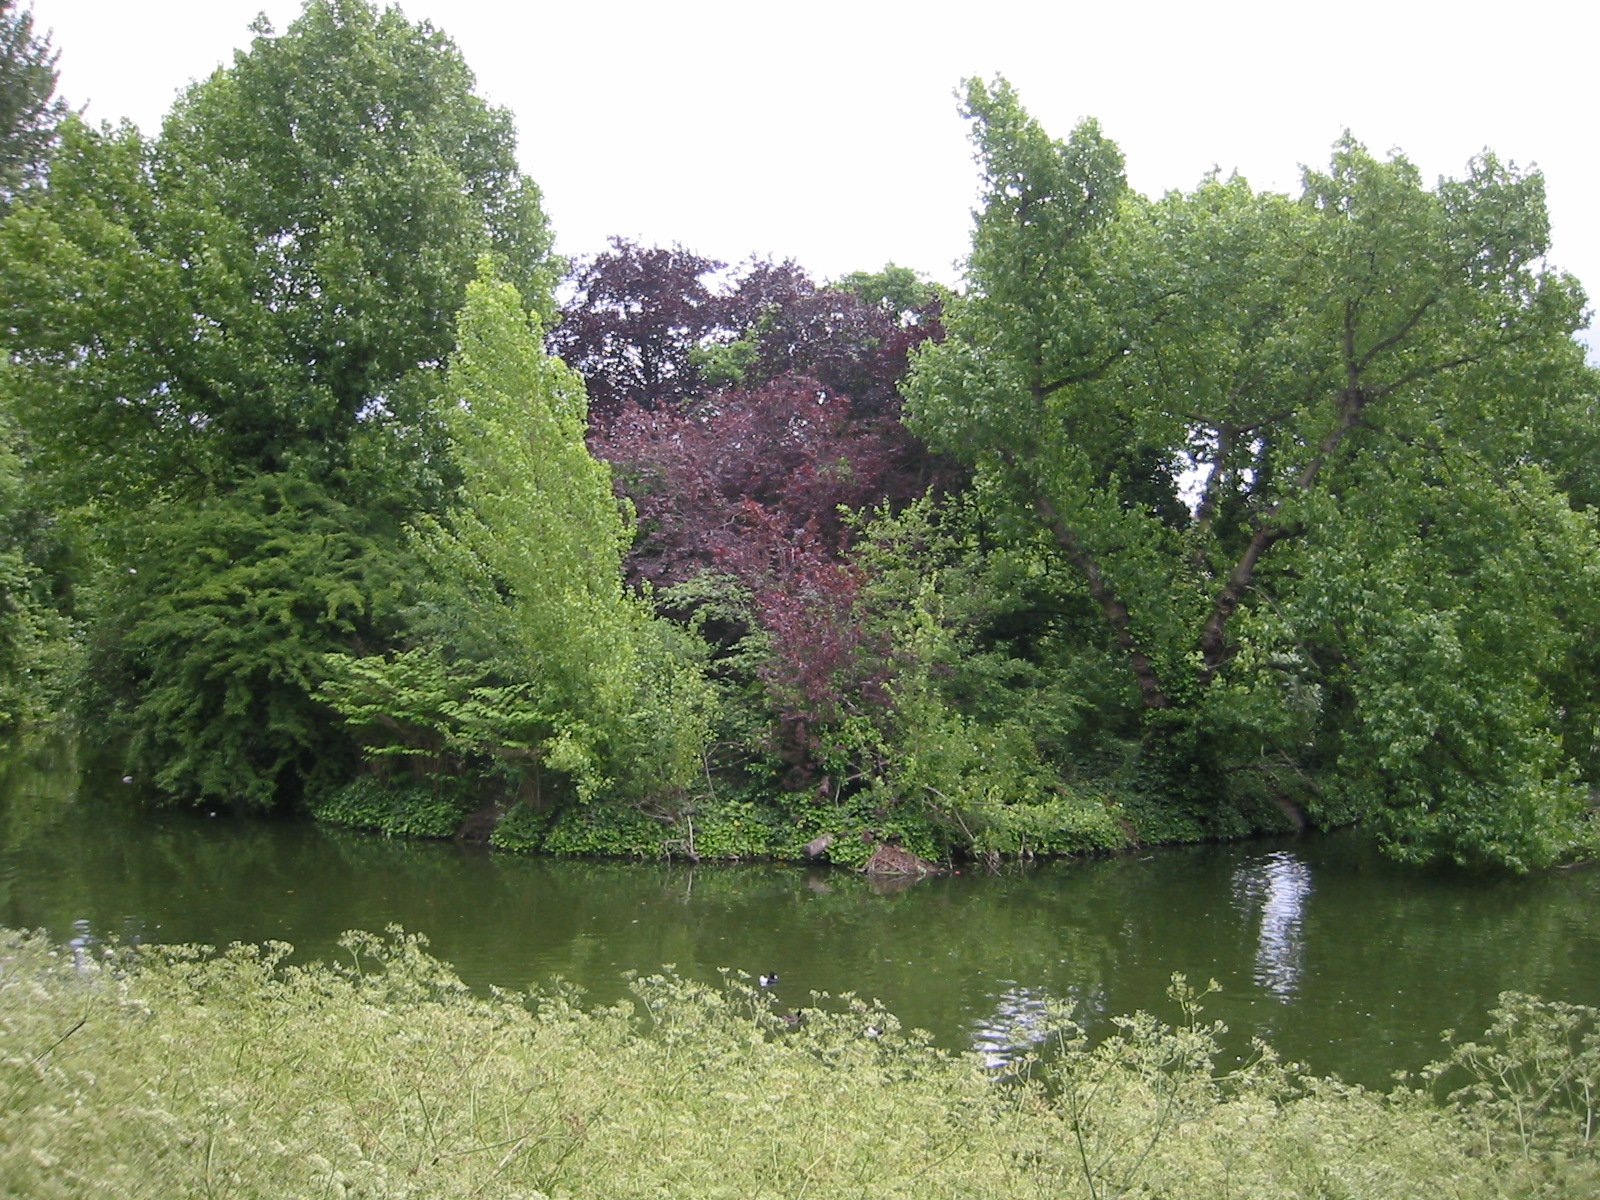 green foliage surrounding a small river in a wooded area